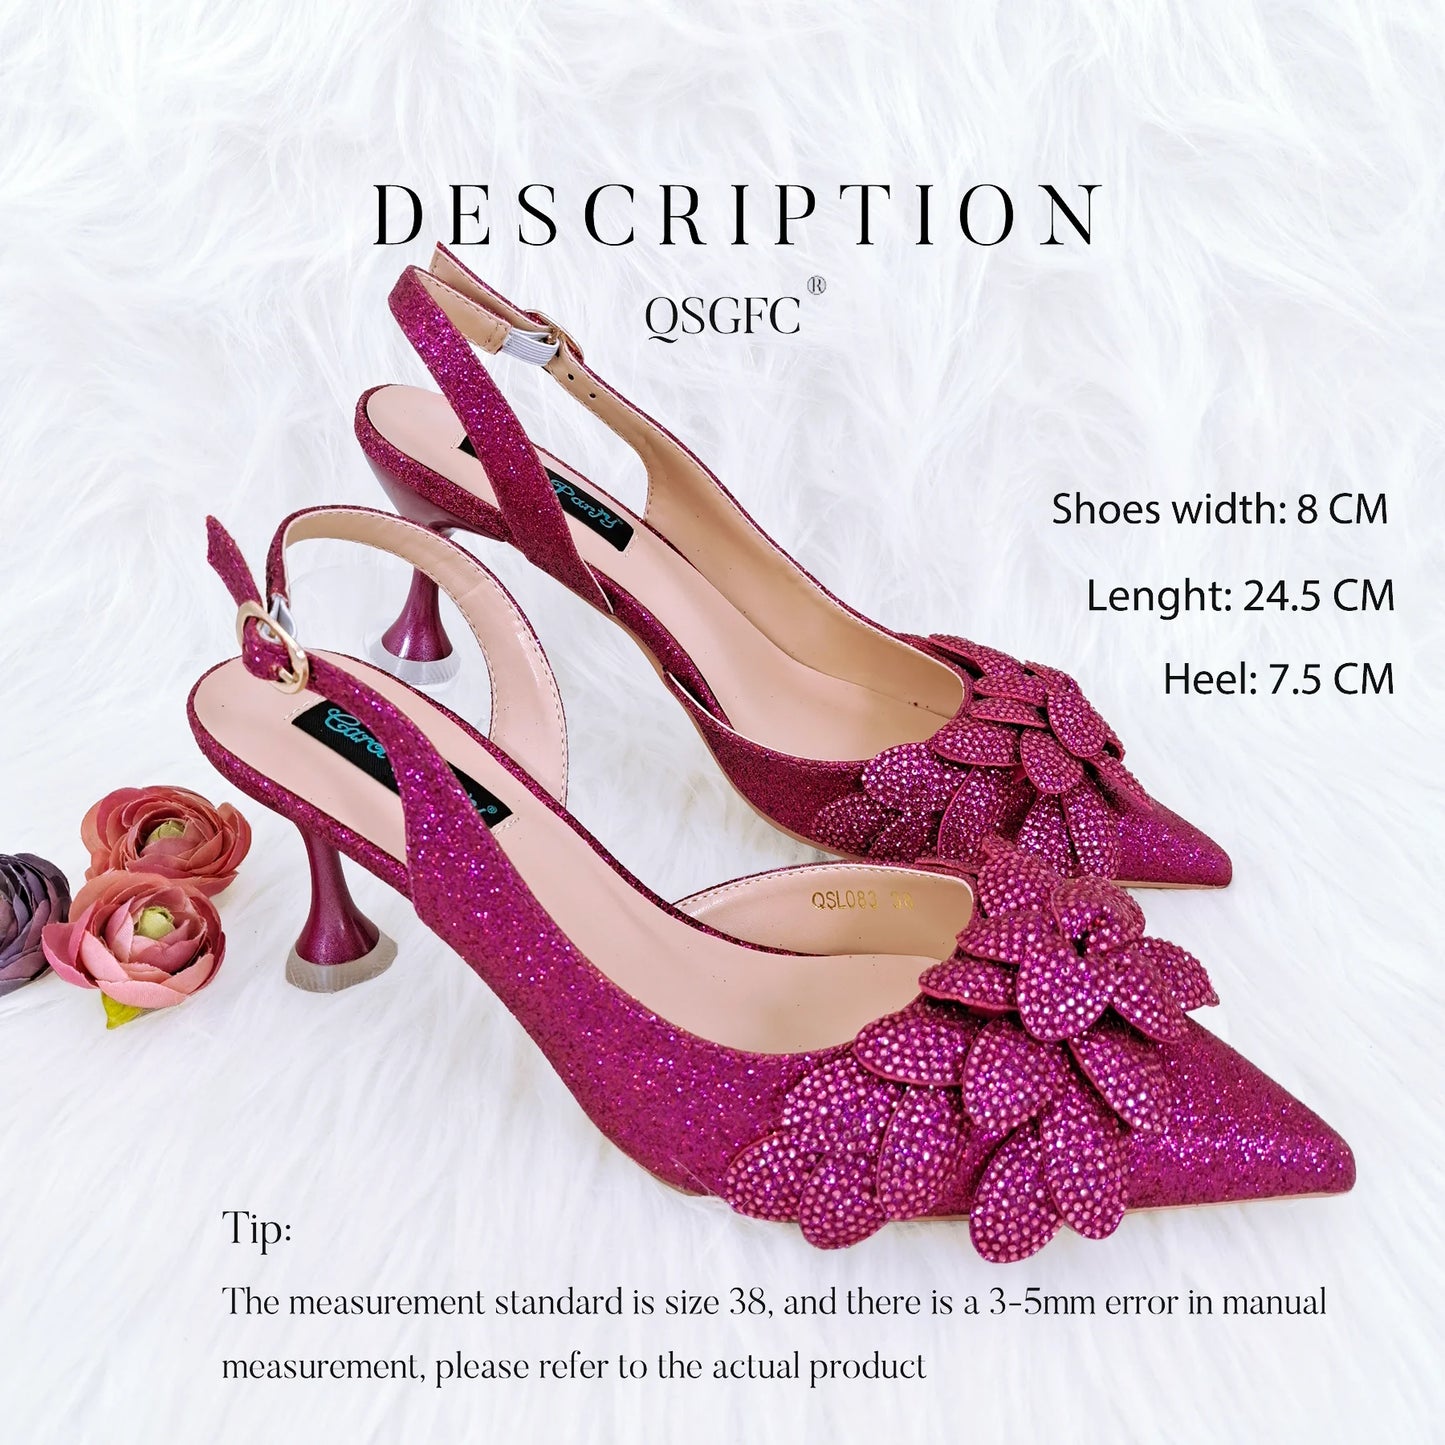 Handmade Garland Gag and Shoes Fashionable Elegant Pointed Toe Women's Pumps Crystal Handle Clutch - Sellinashop